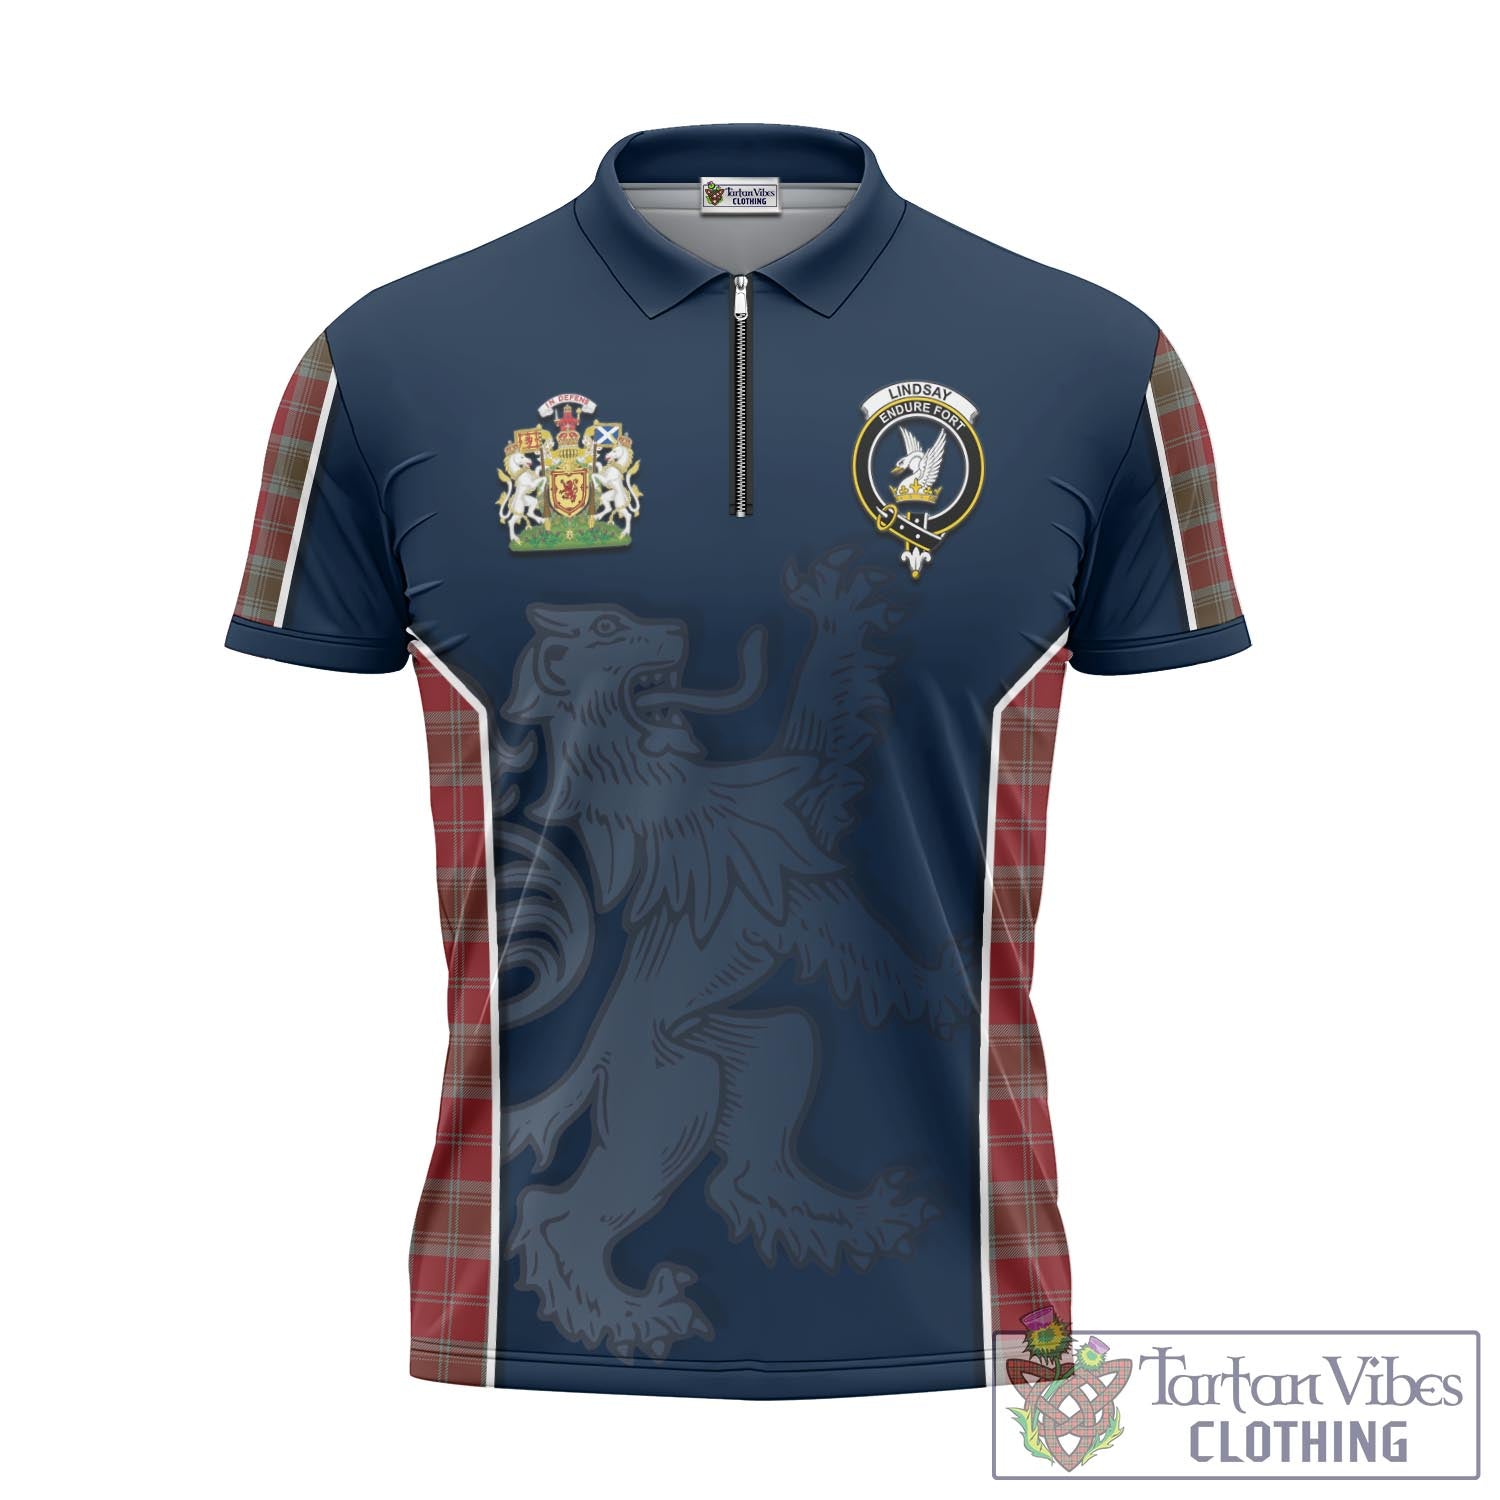 Tartan Vibes Clothing Lindsay Weathered Tartan Zipper Polo Shirt with Family Crest and Lion Rampant Vibes Sport Style